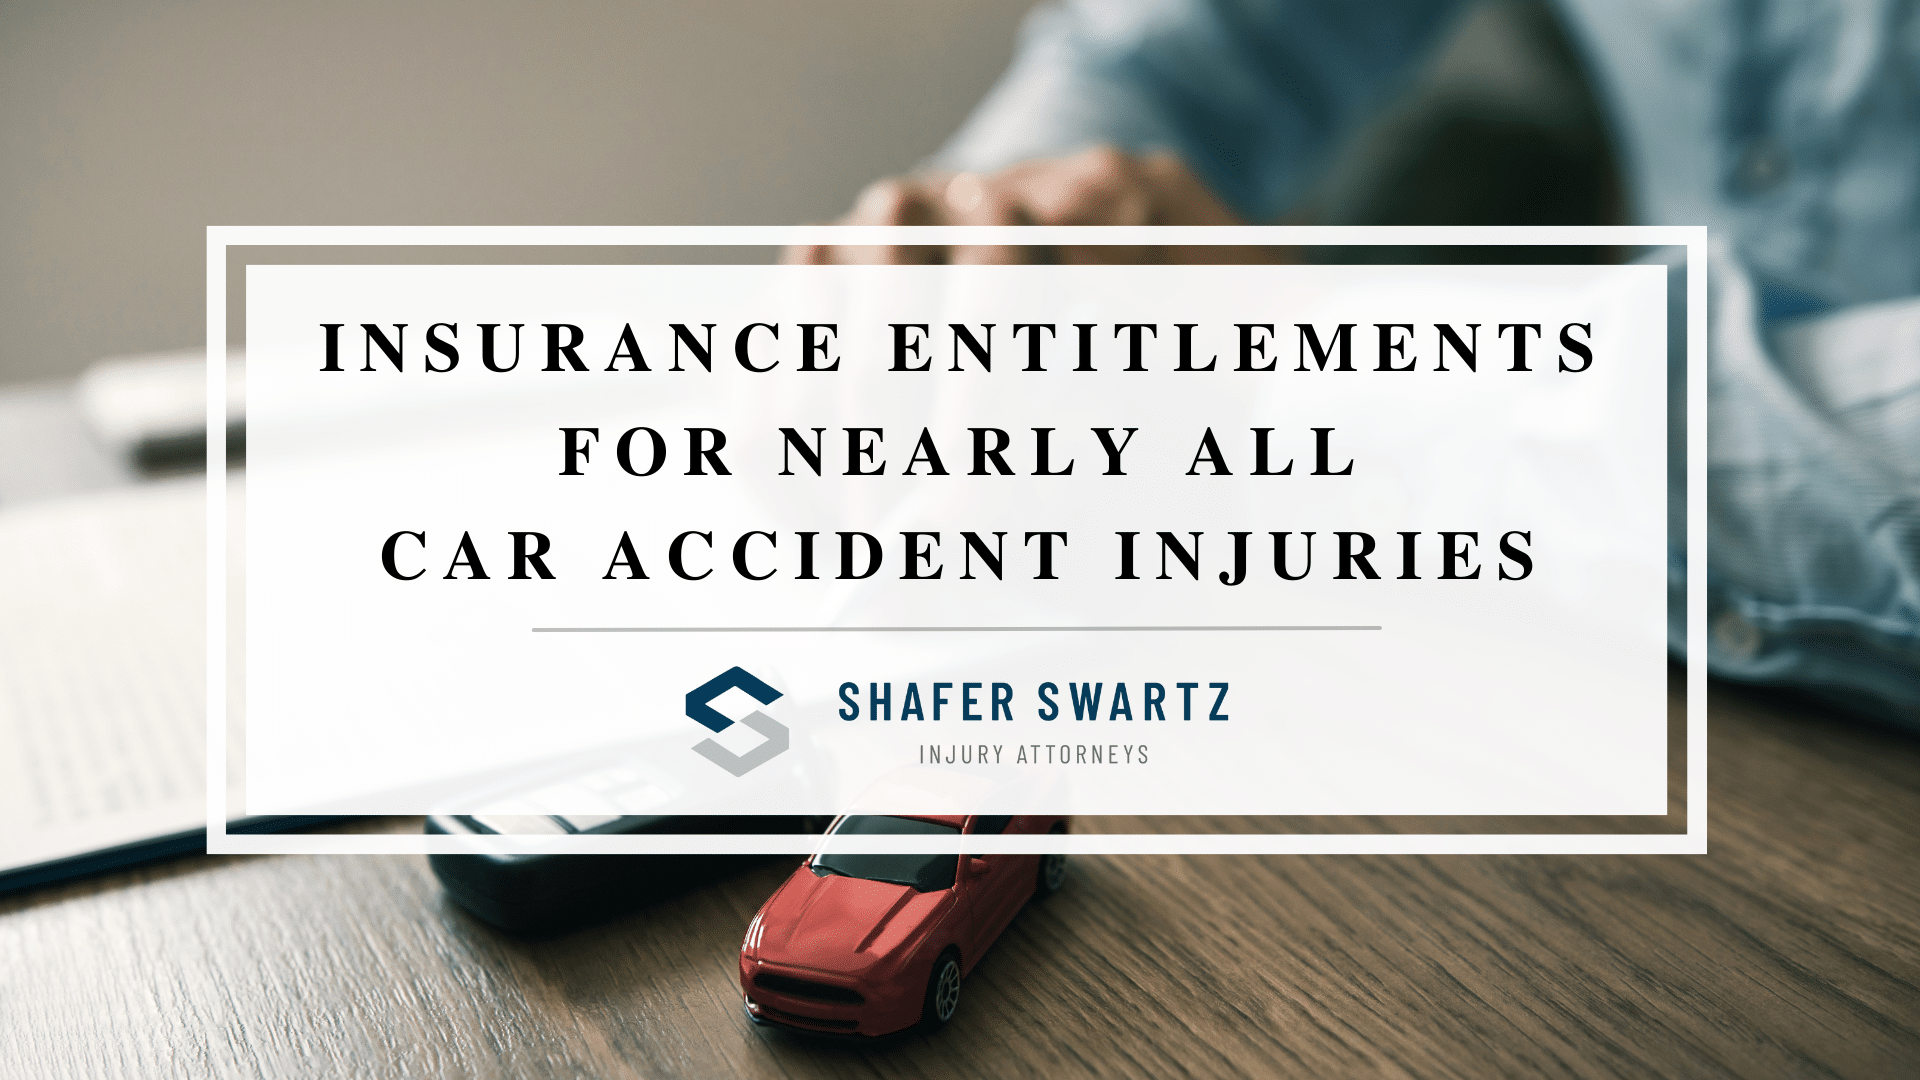 Featured image of Insurance Entitlements for Nearly All Car Accident Injuries